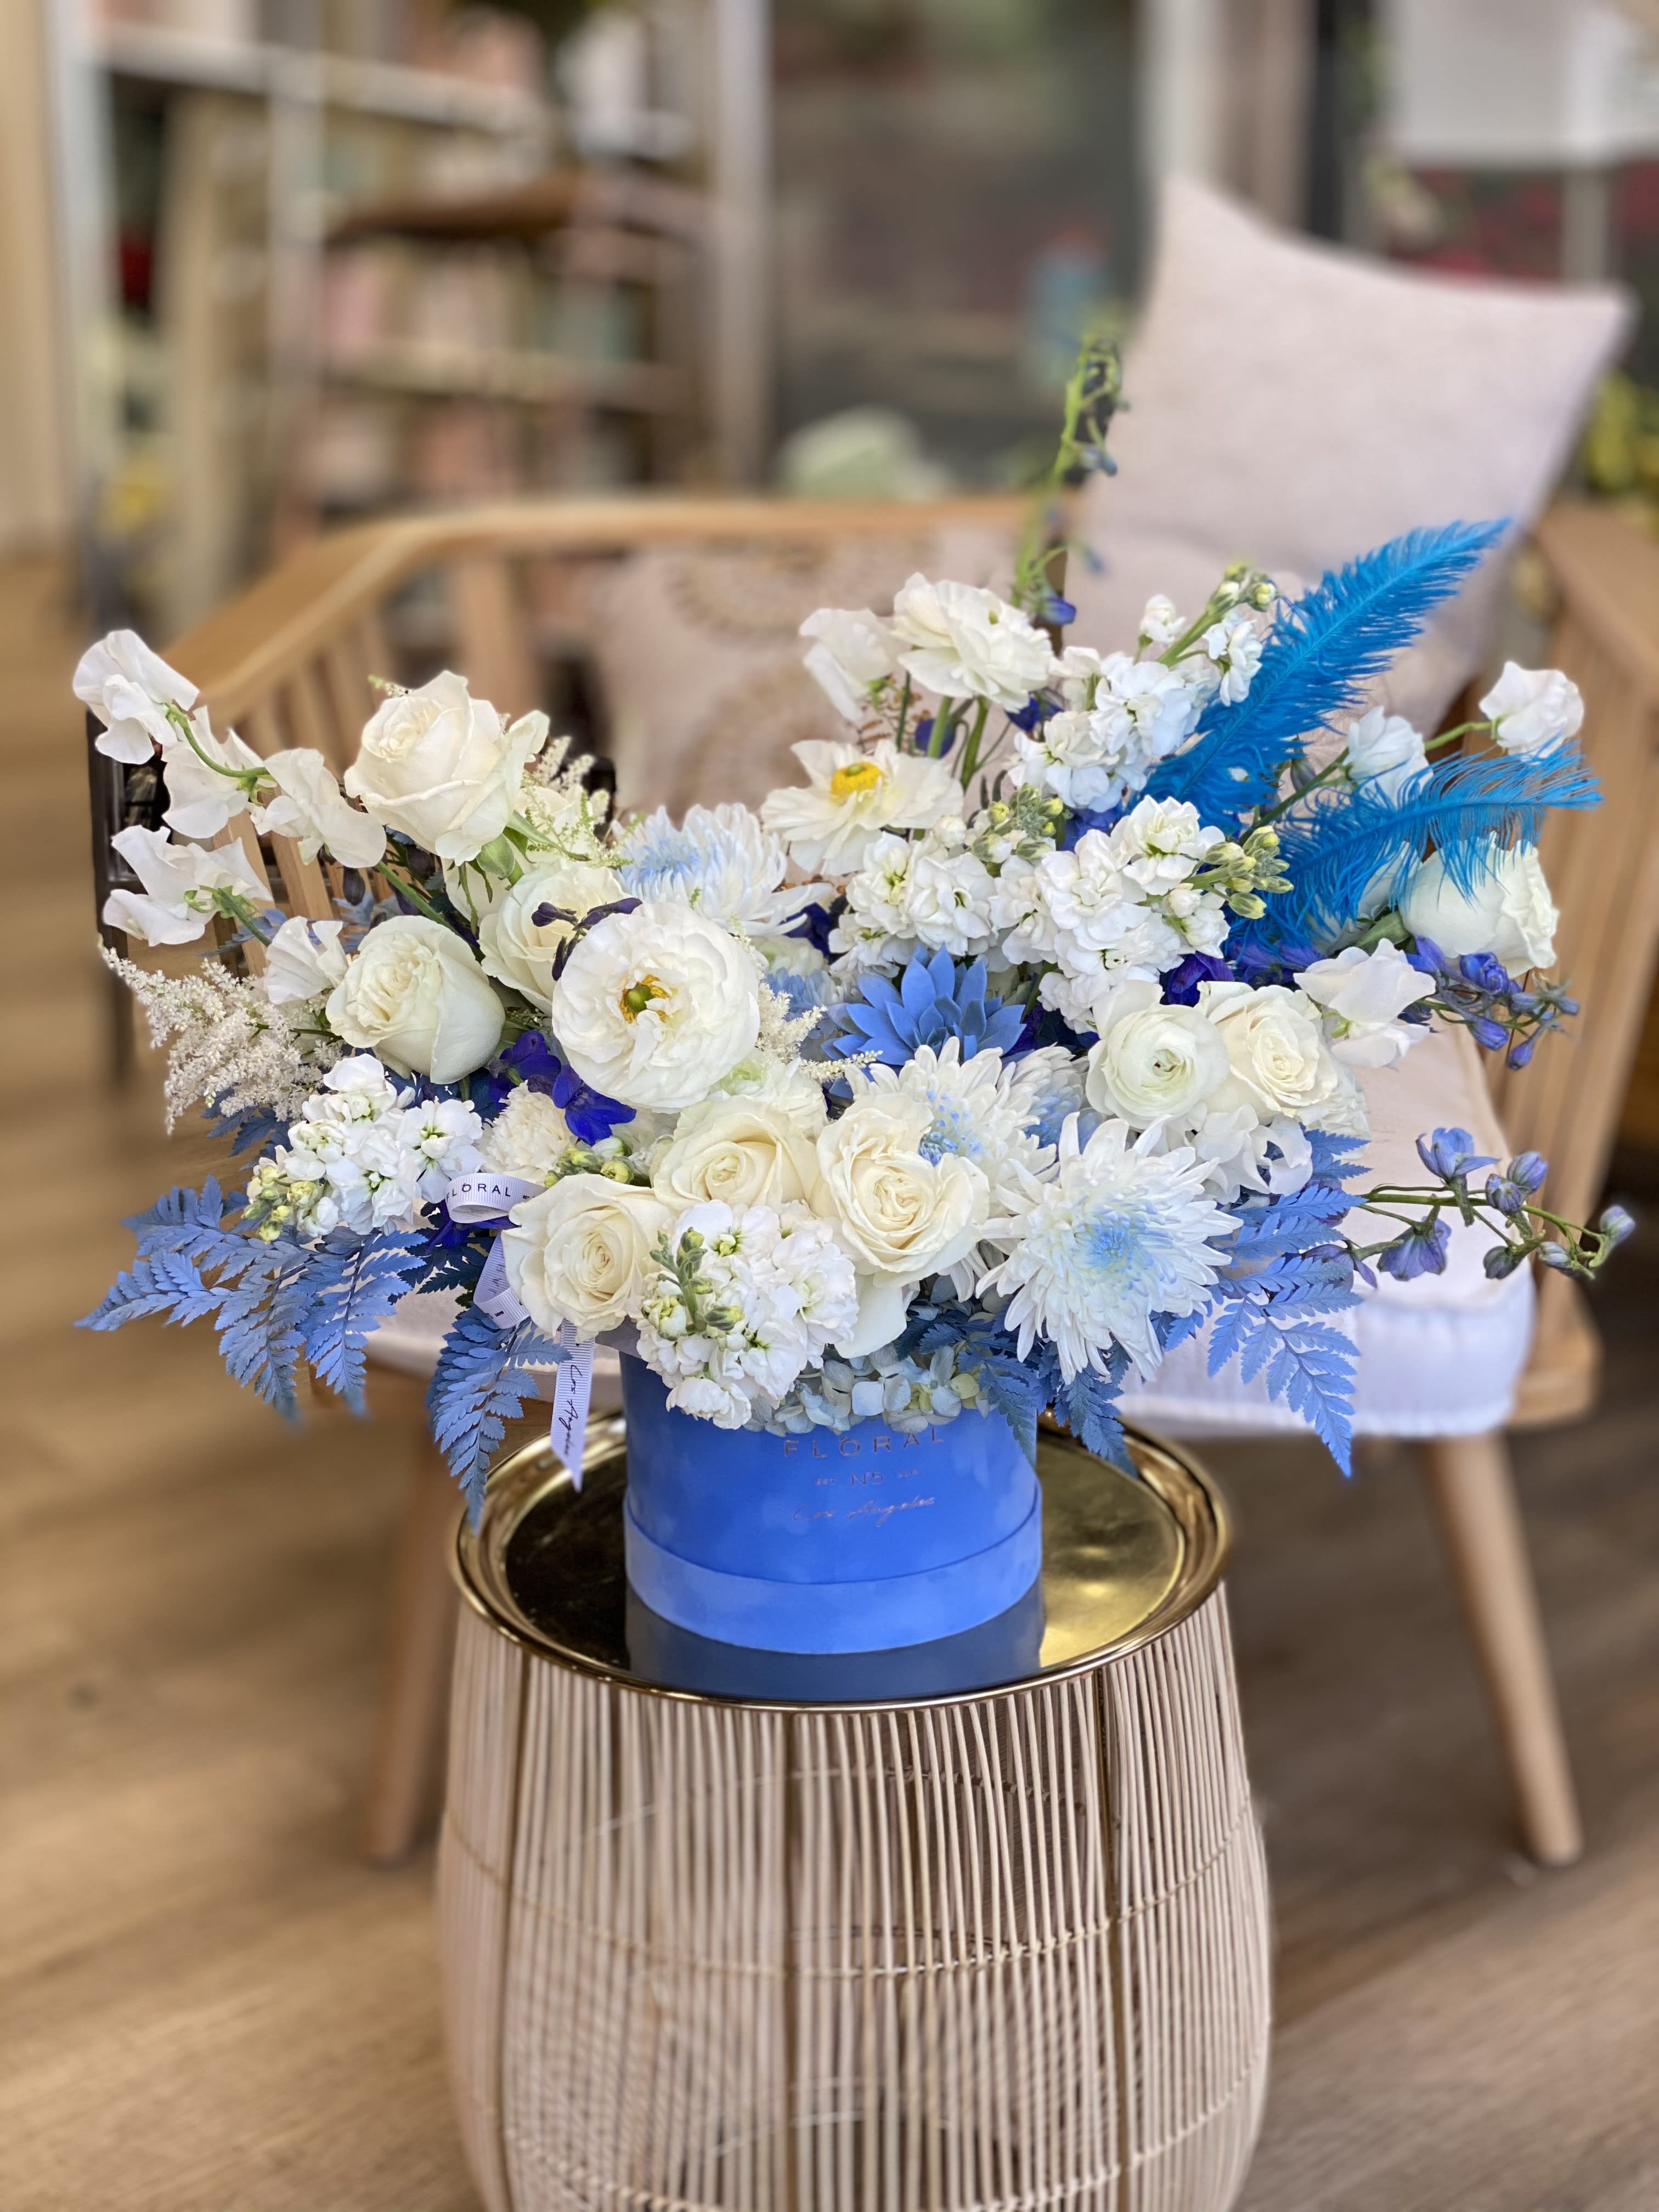 No. 222 - Blue Feathers - This beautiful blue and white arrangement made with Roses, Fern, stock, succulent and more flowers to complete composition   Available in one size only